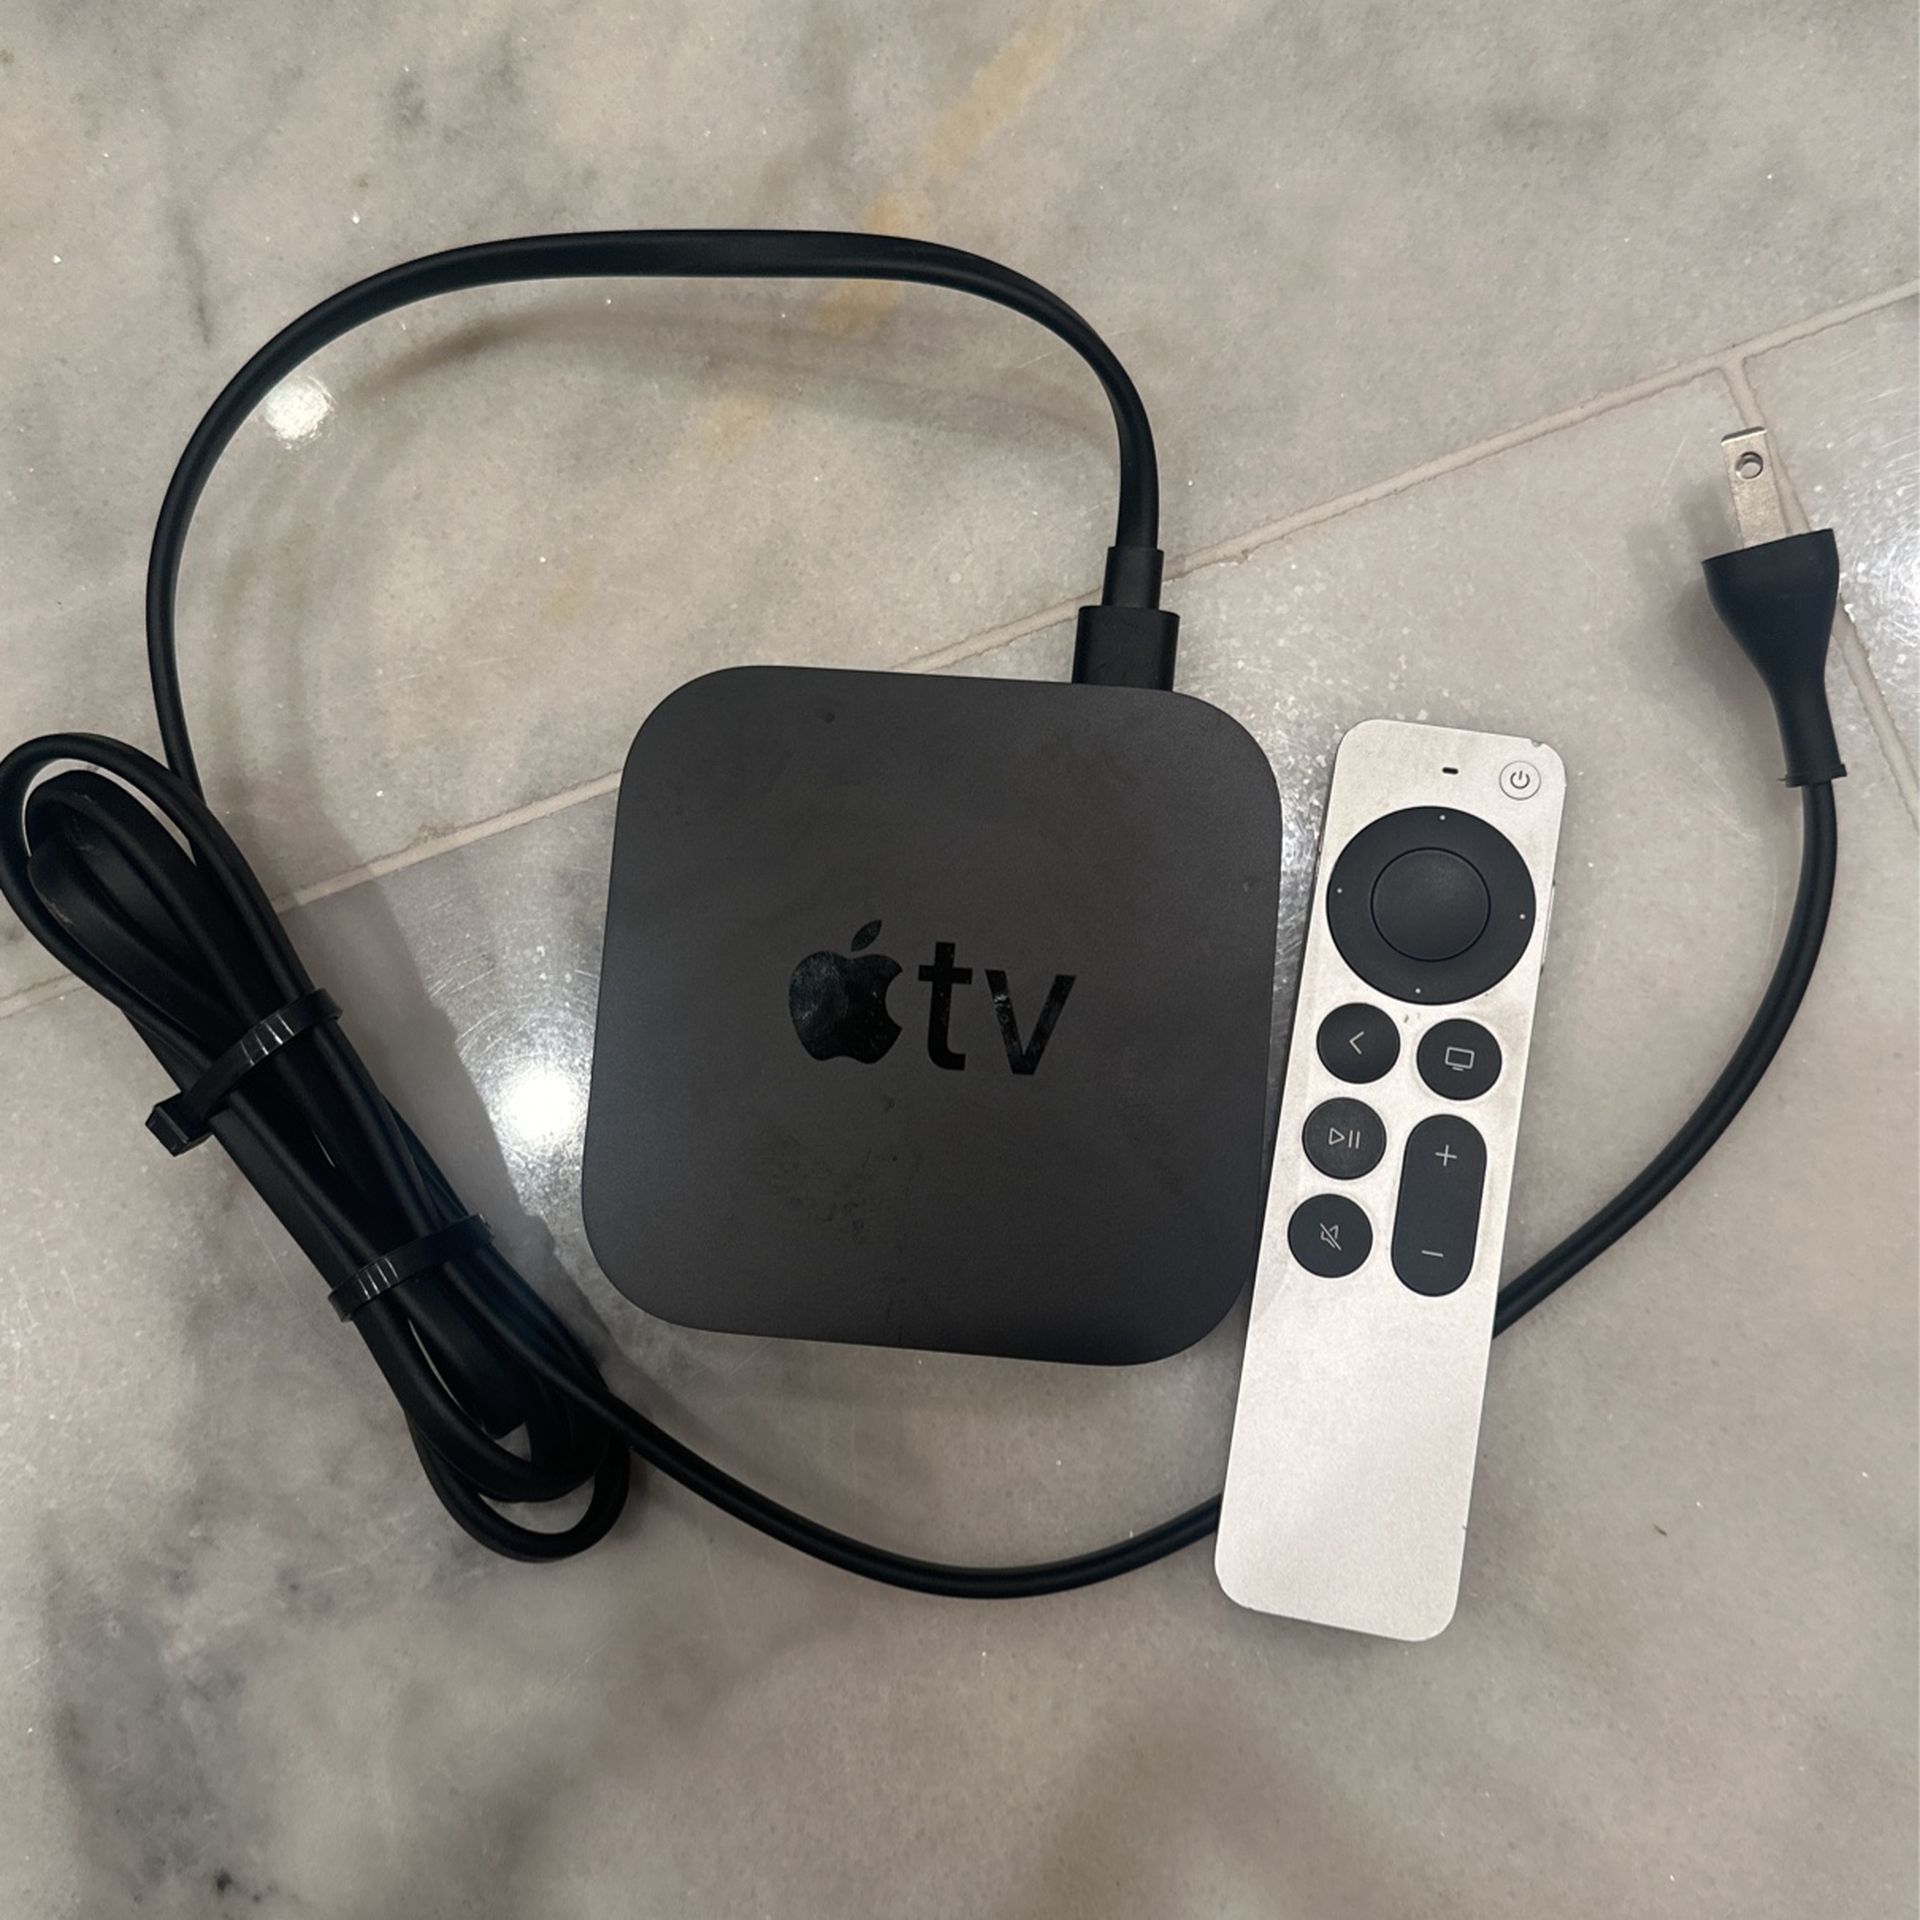 Like new black Apple TV 4K (2nd generation) with remote and power cord